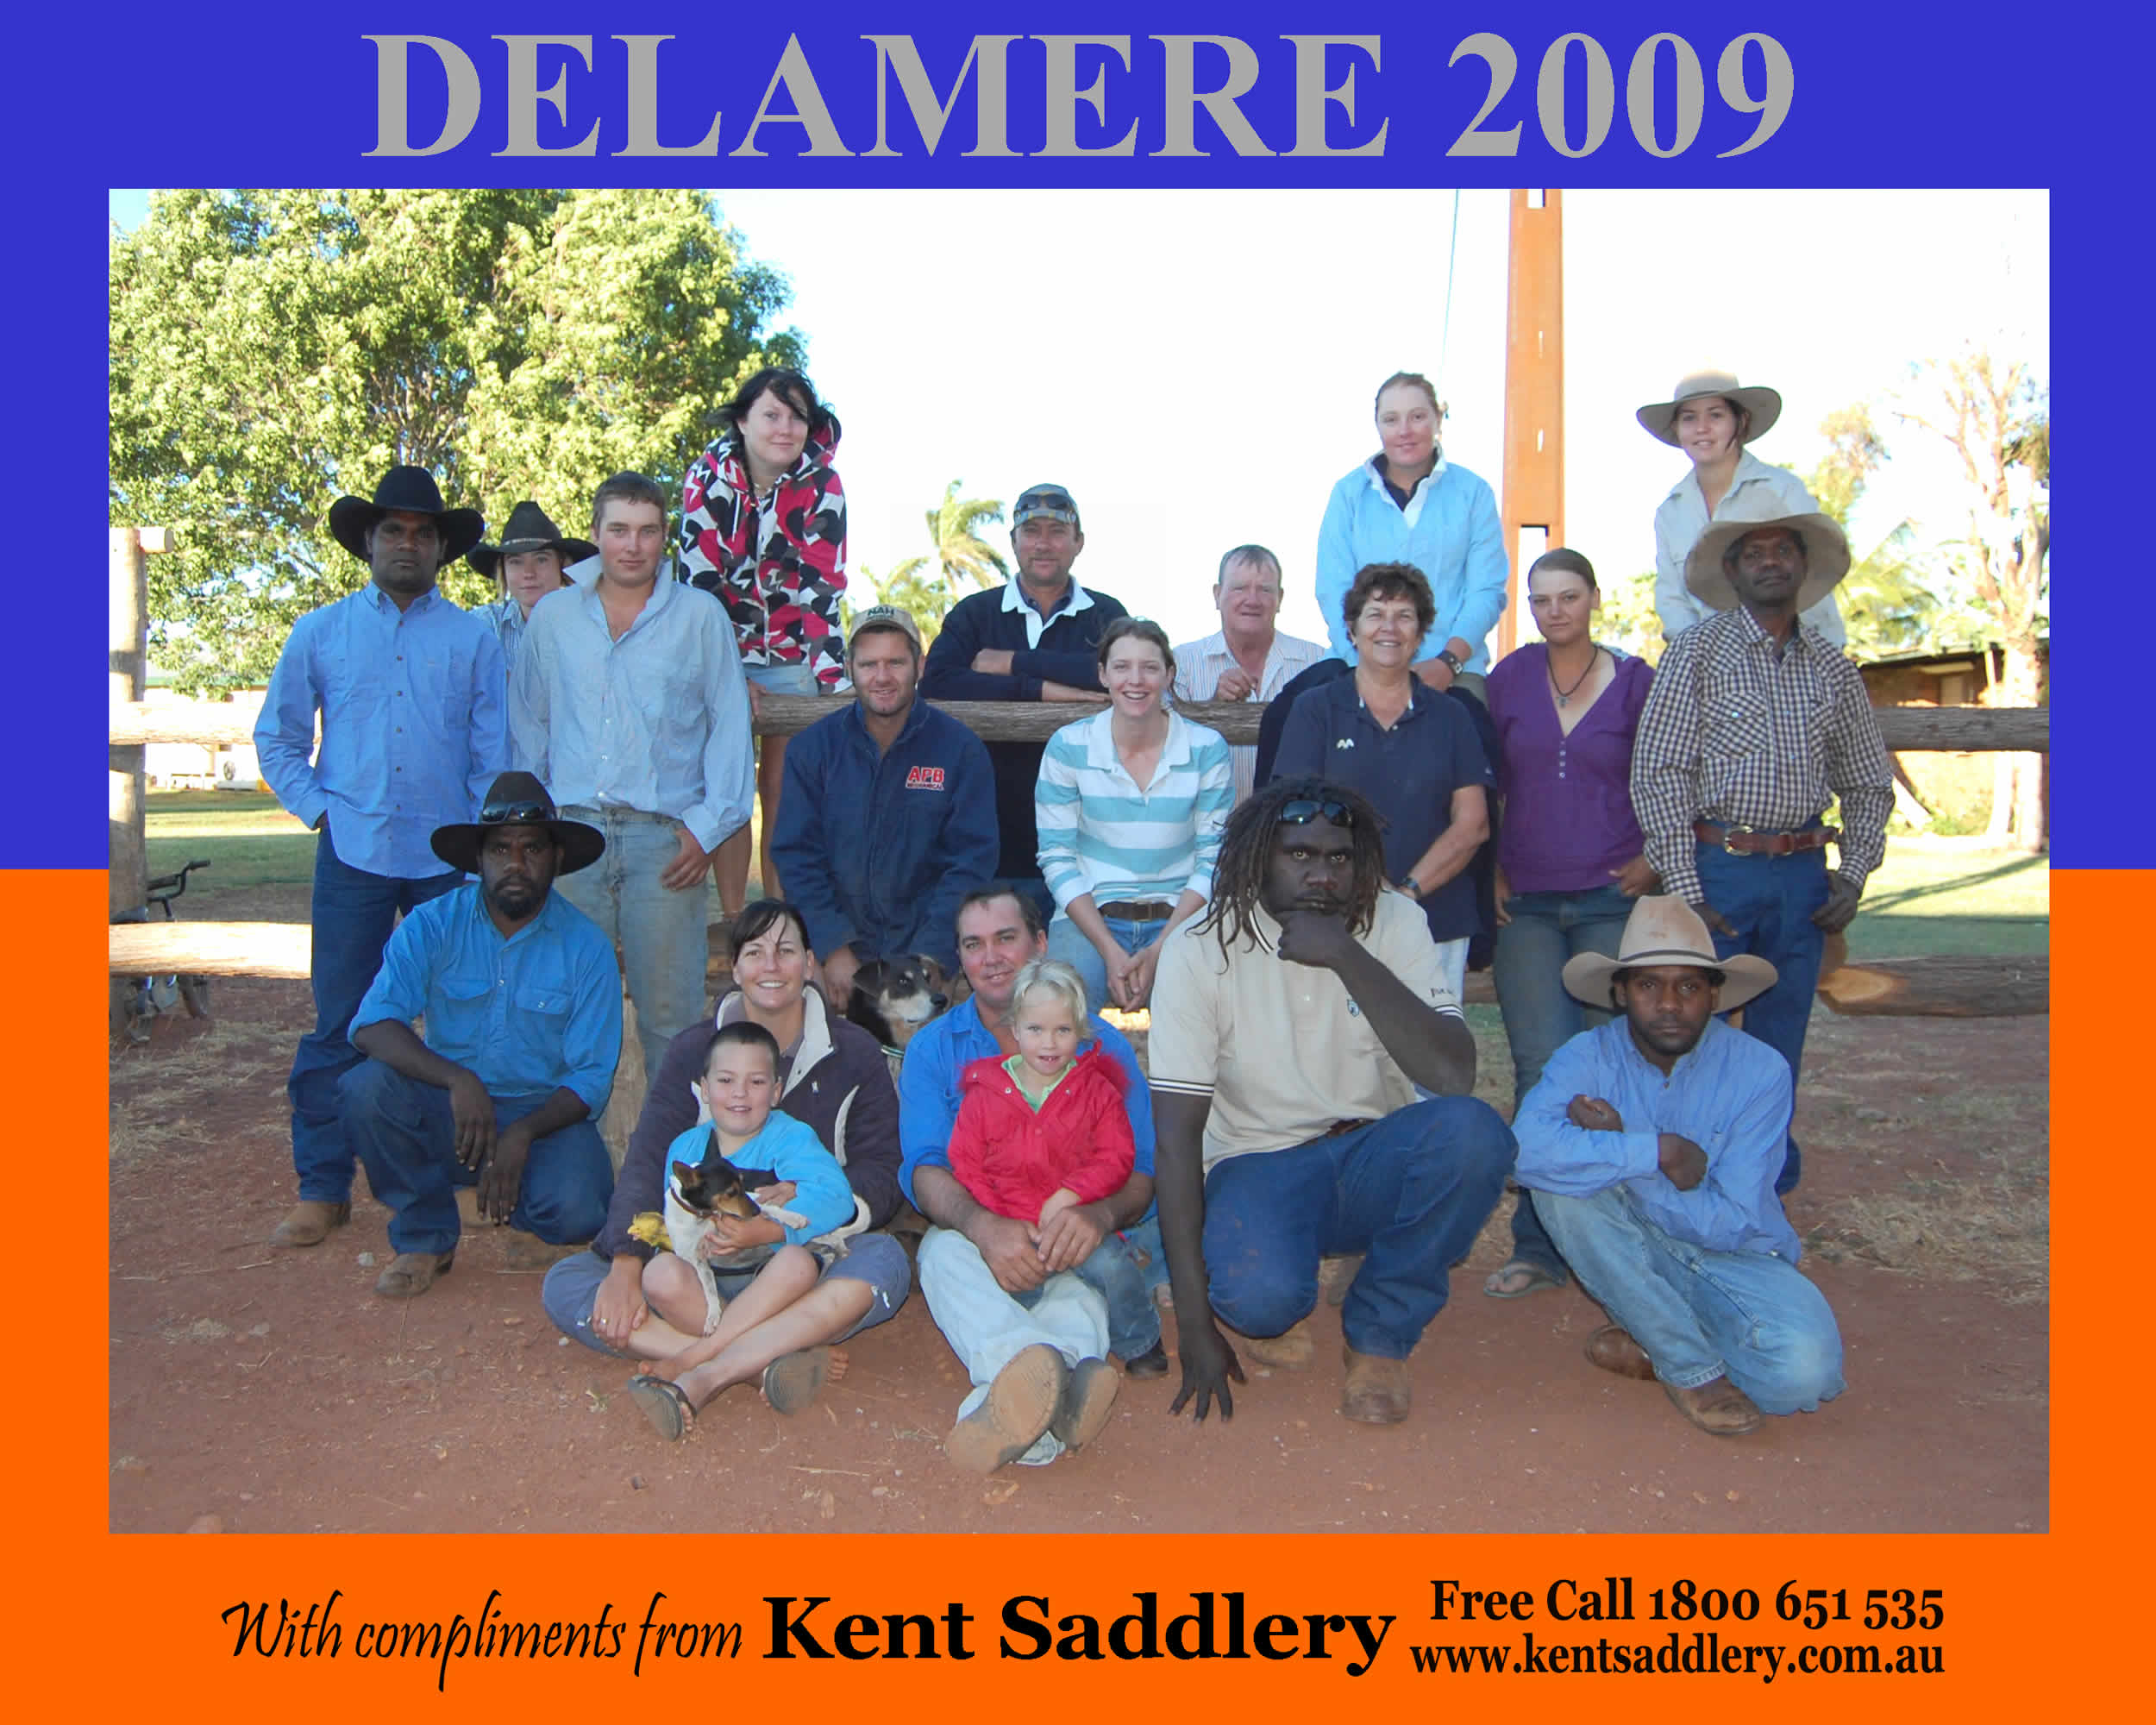 Northern Territory - Delamere 25